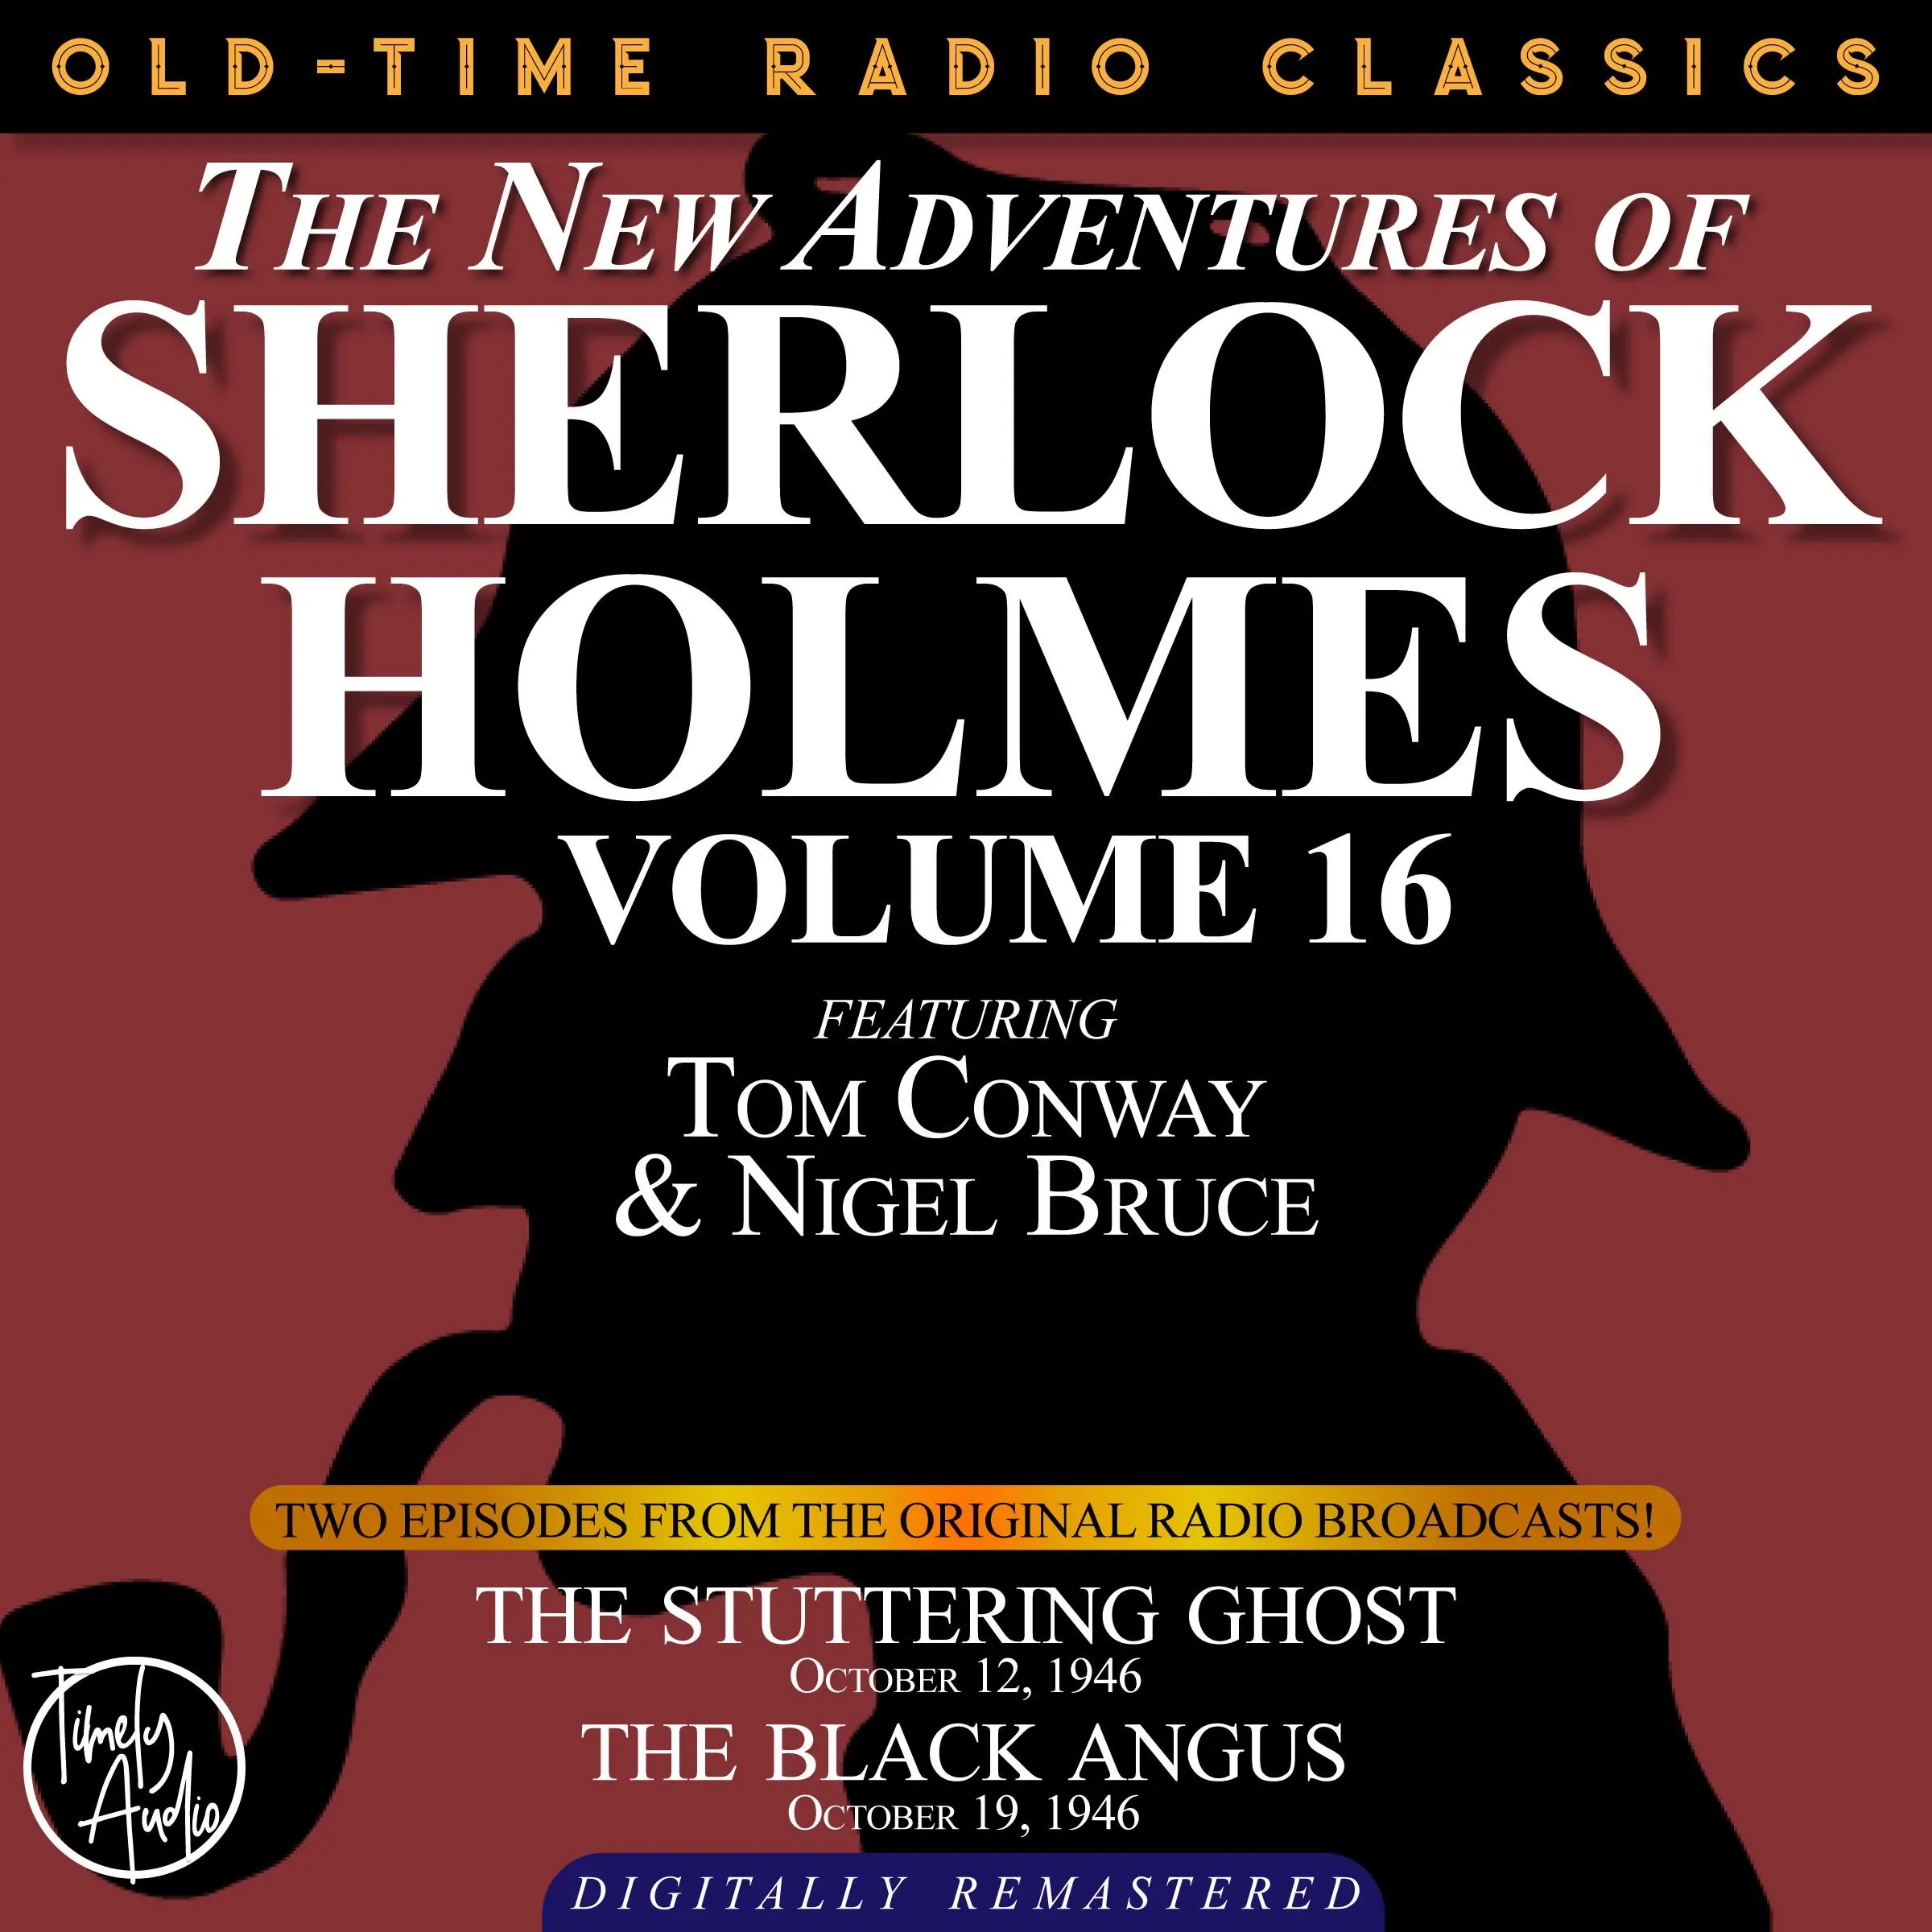 THE NEW ADVENTURES OF SHERLOCK HOLMES, VOLUME 16: EPISODE 1: THE STUTTERING GHOST. EPISODE 2: THE BLACK ANGUS by Sir Arthur Conan Doyle Audiobook